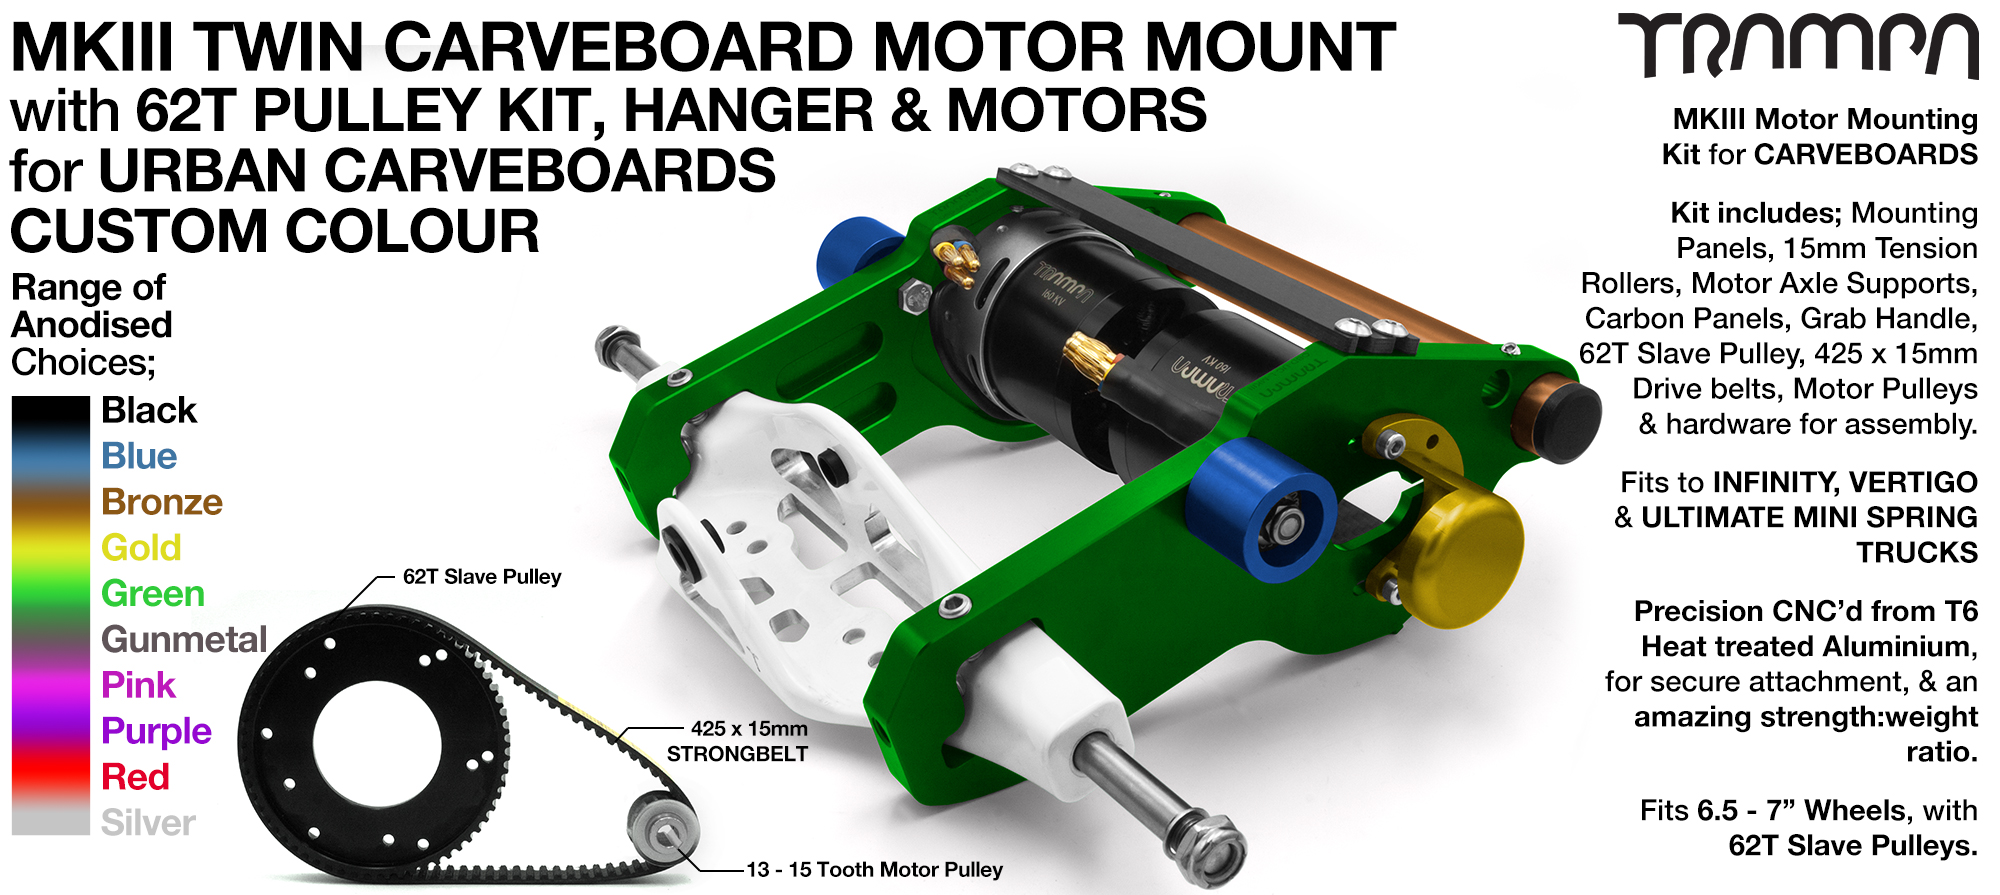 MkIII URBAN CARVEBOARD Motor mount Connector Panel on a HANGER with 44 Tooth Pulley Kit & Motor - TWIN